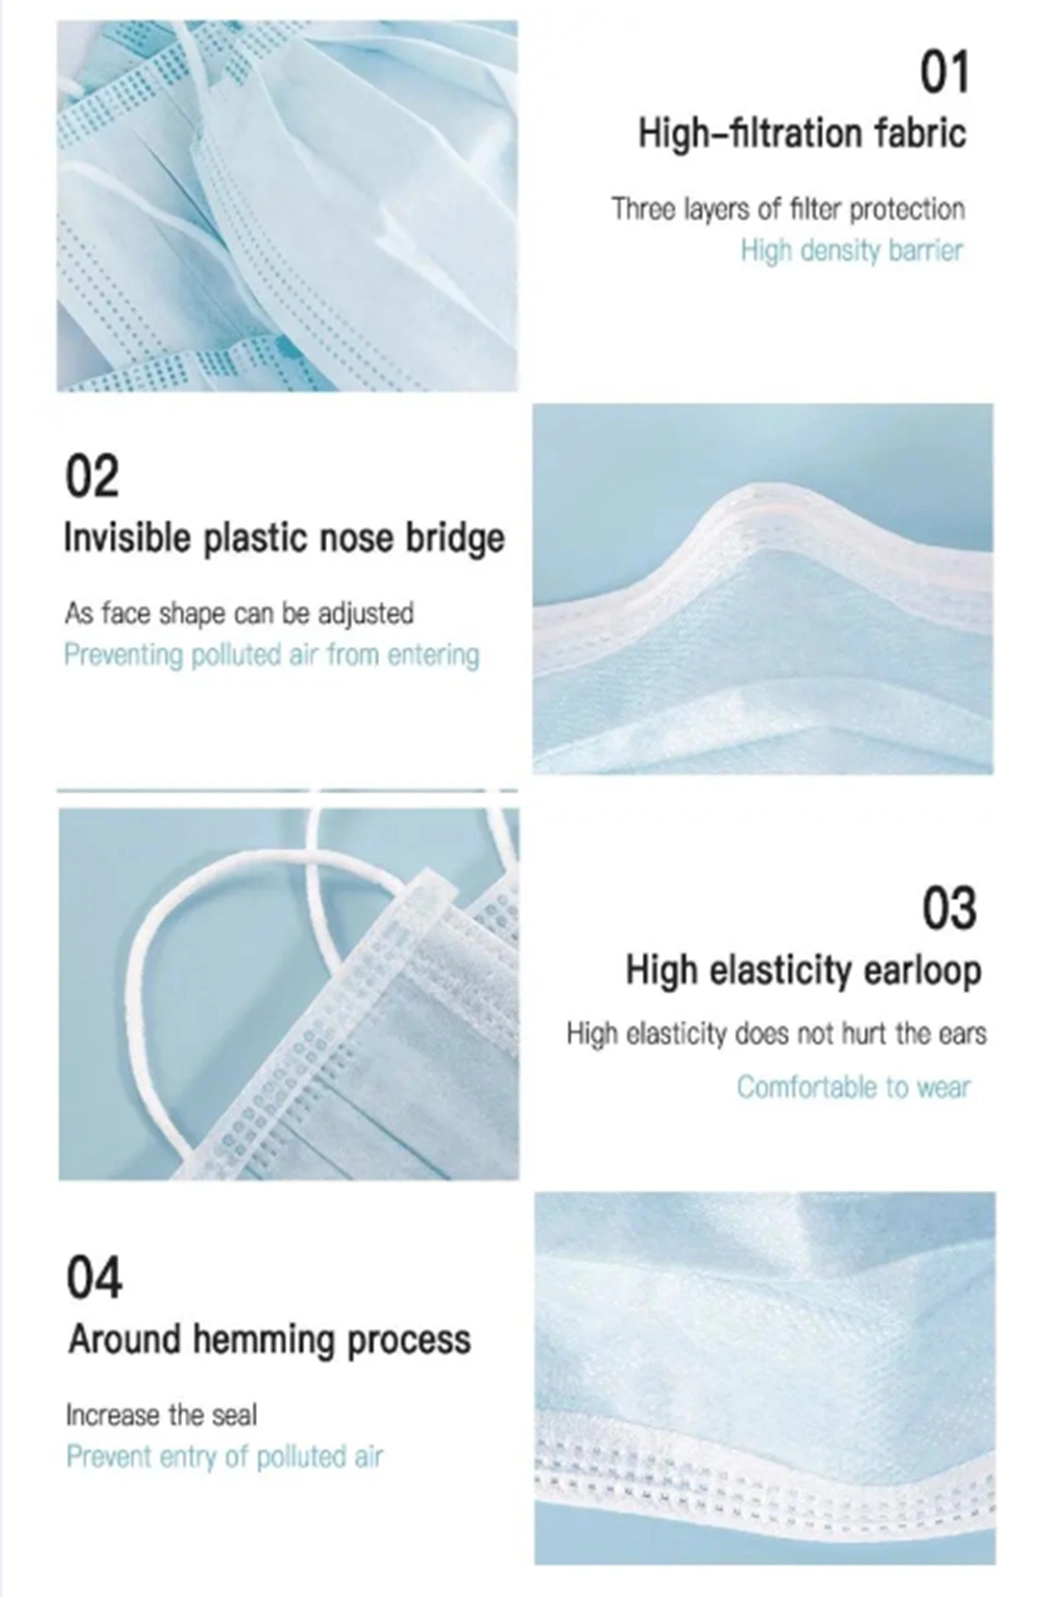 Production Line Fashion Filter Earloop Health Ce Japan Strip LED 3 Layer Disposable Medical Face Mask